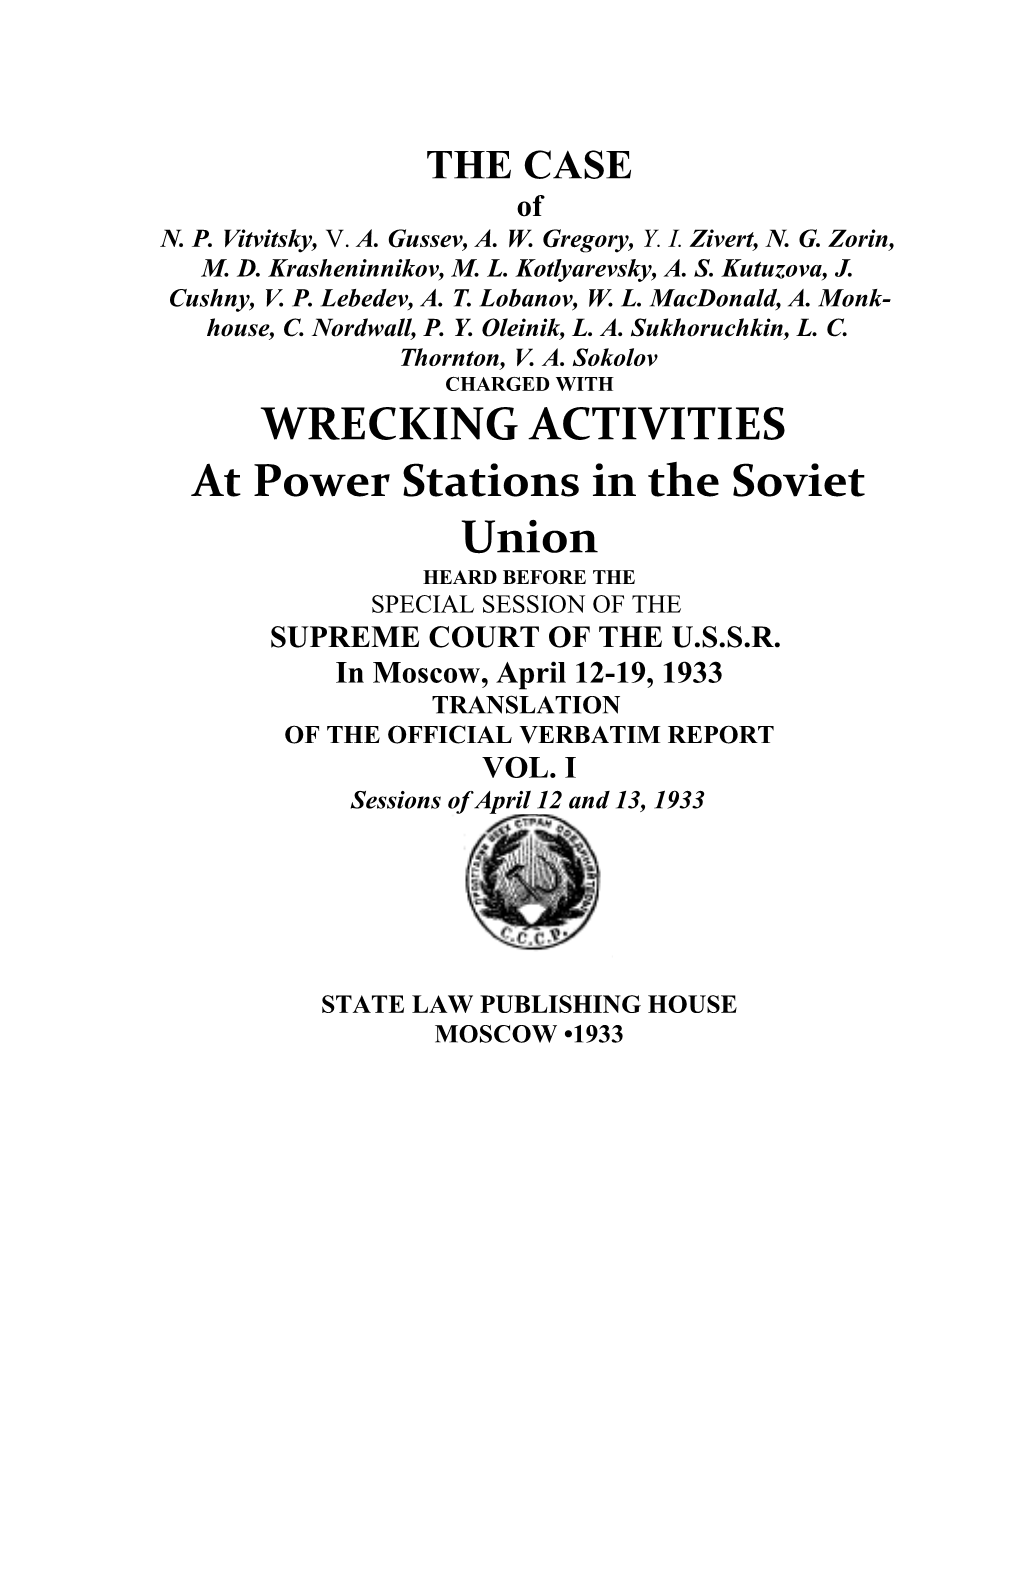 WRECKING ACTIVITIES at Power Stations in the Soviet Union